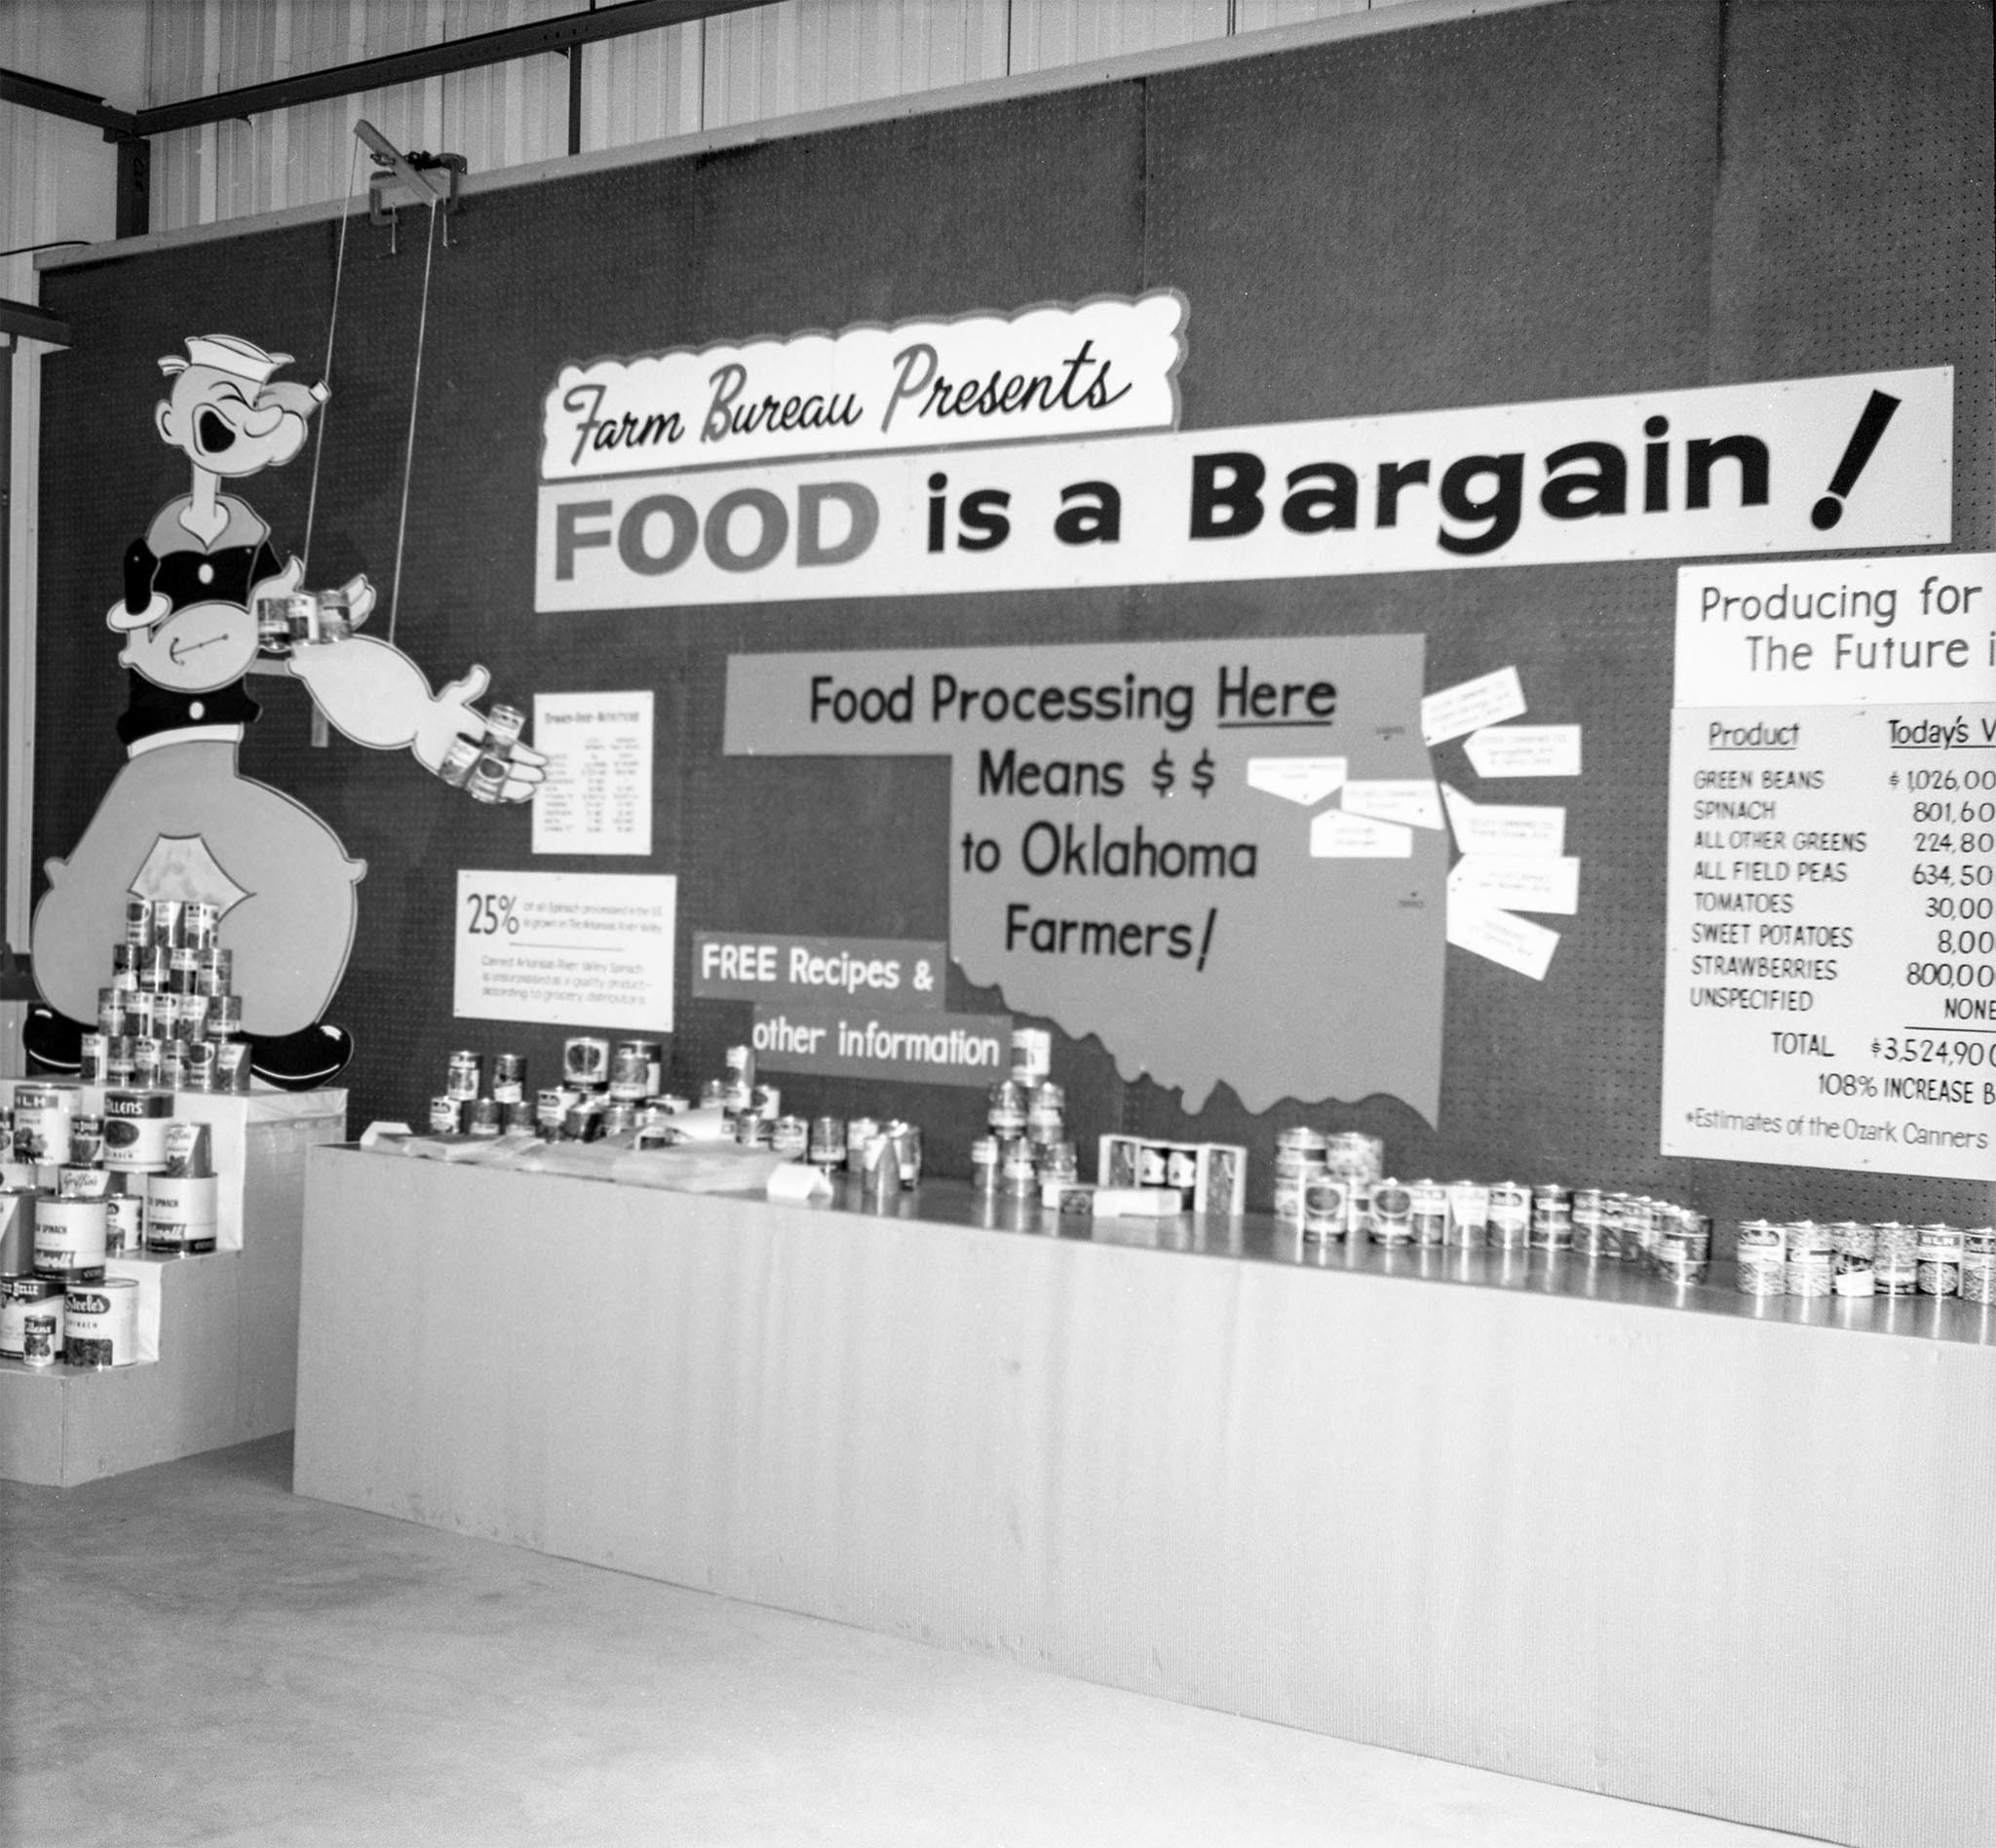 This booth was assembled at the Oklahoma City Fair in 1964. “Food is a Bargain” was the theme for the booth, presenting a story on a truth of Oklahoma agriculture that many consumers did not understand: a story detailing the economic impact of vegetables grown in Oklahoma and processed in the state and western Arkansas.